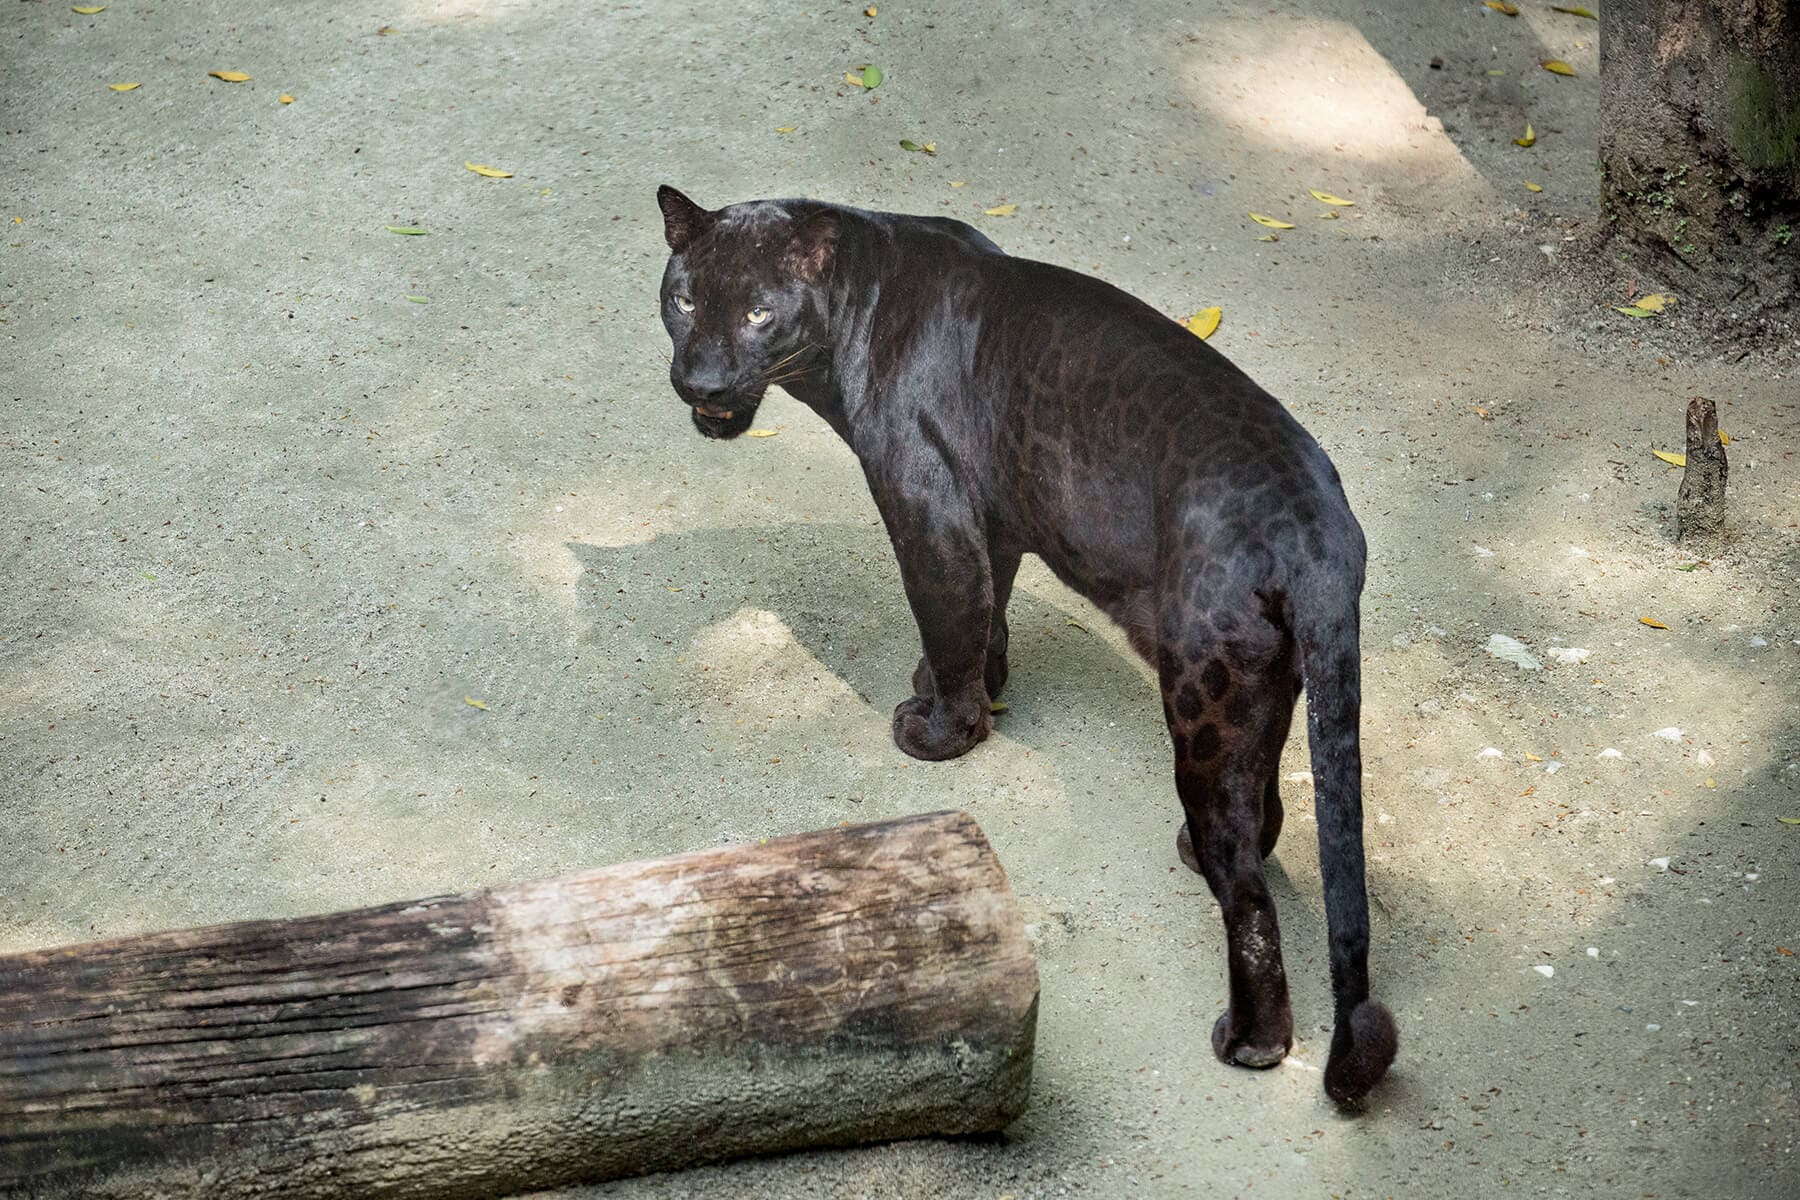 Our handsome resident black panther from Sunway Lagoon Wildlife Park – is this Bagheera from Mowgli?!